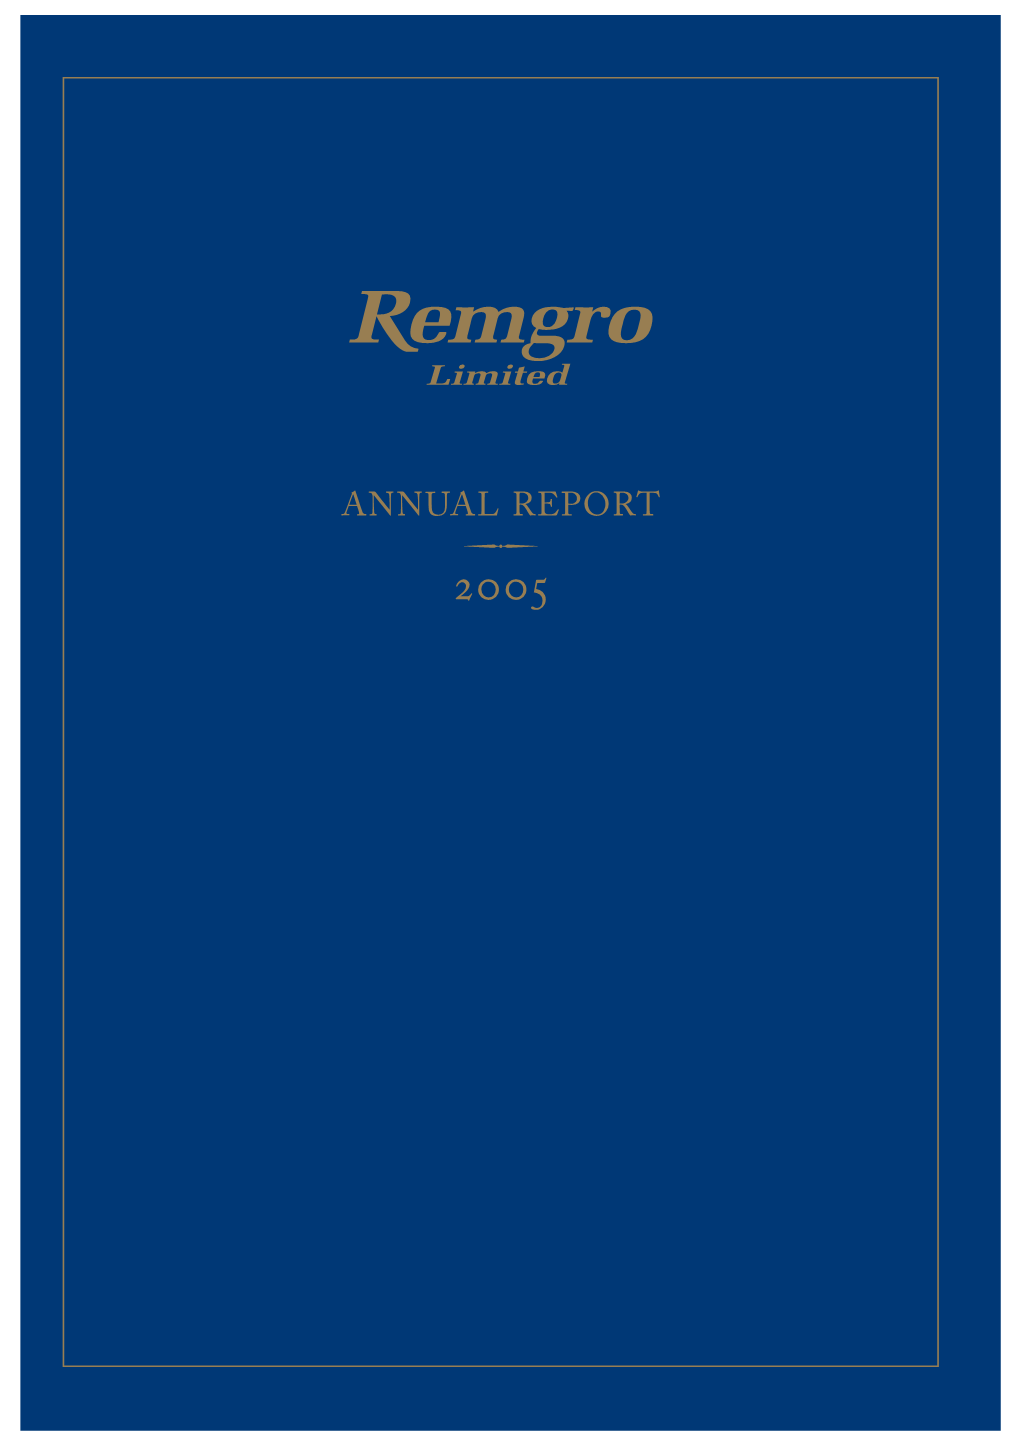 Remgro Limited Annual Report 2005